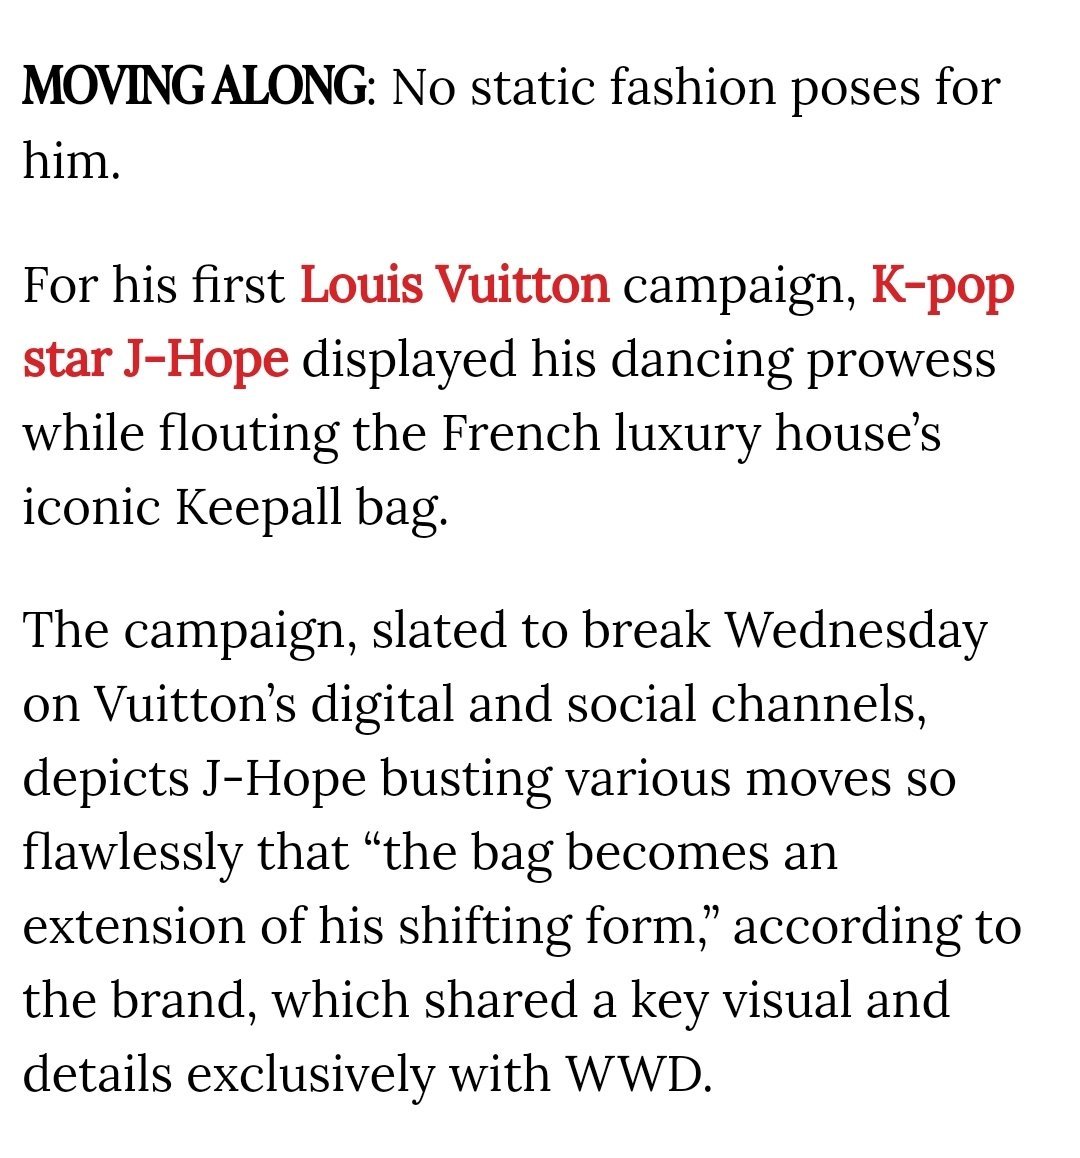 jayvee on X: According to Louis Vuitton, as J-Hope busts various moves  flawlessly, the bag becomes an extension of his shifting form. Such an  accurate statement!  / X